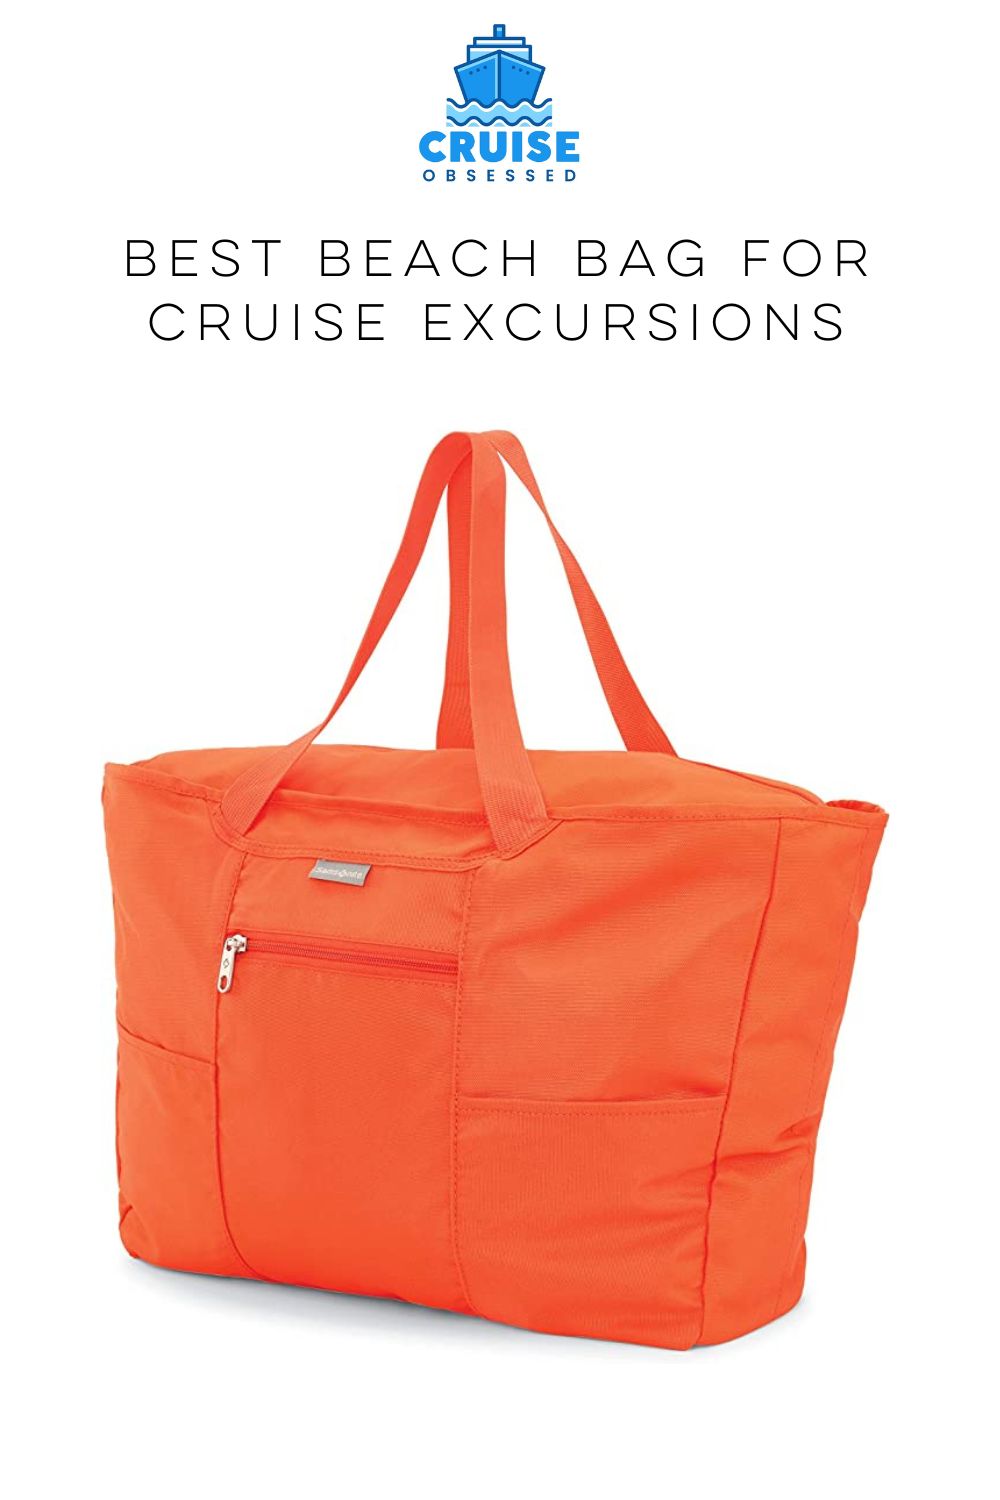 bag for cruise excursions